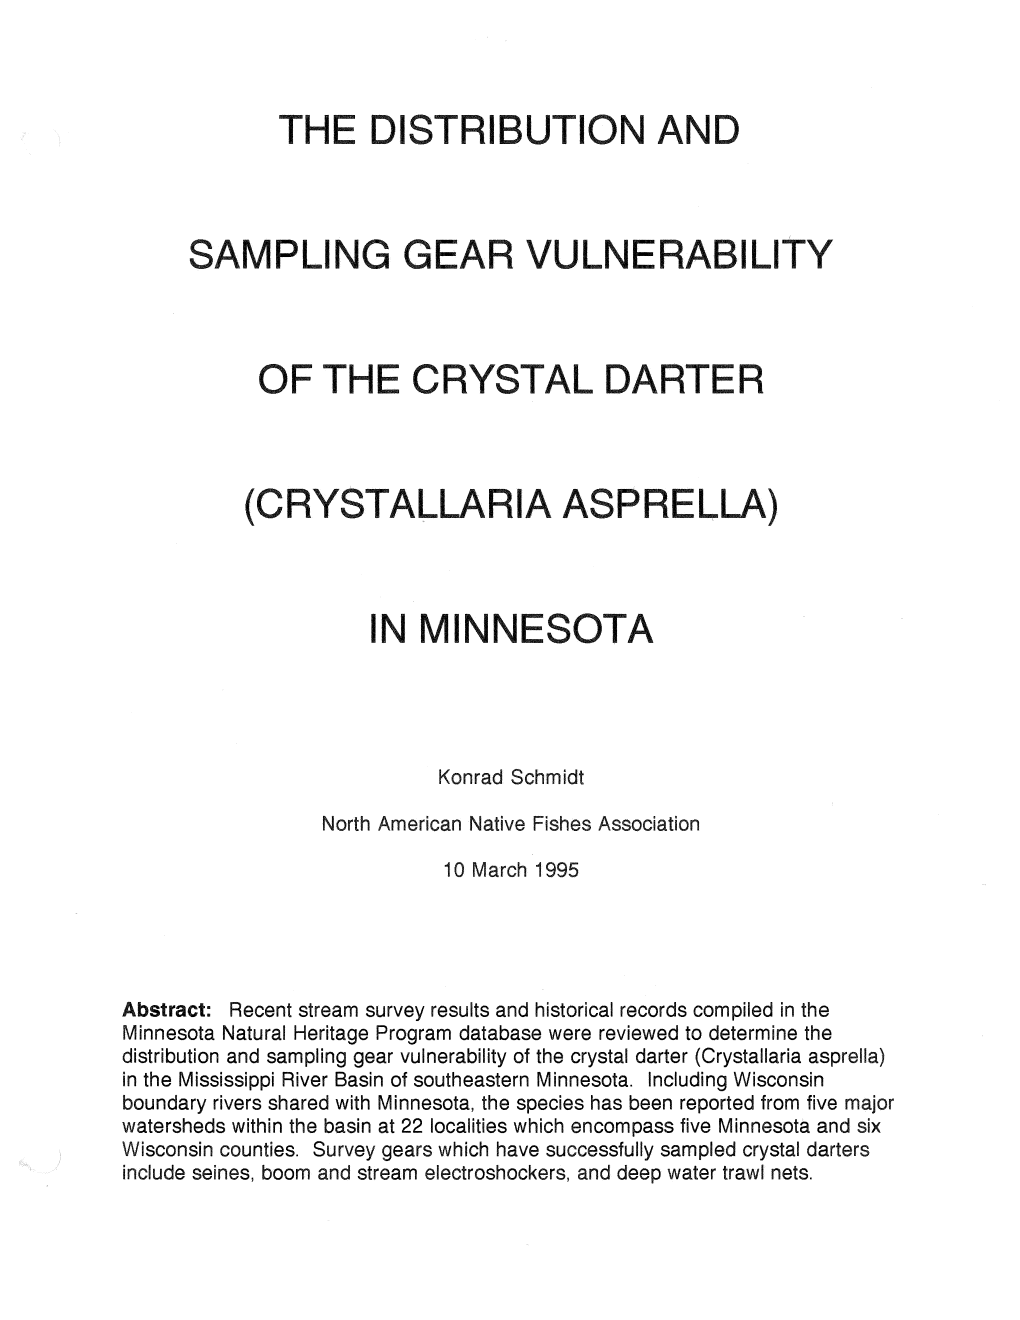 The Distribution and Sampling Gear Vulnerability of the Crystal Darter (Crystallaria Asprella) in the Mississippi River Basin of Southeastern Minnesota